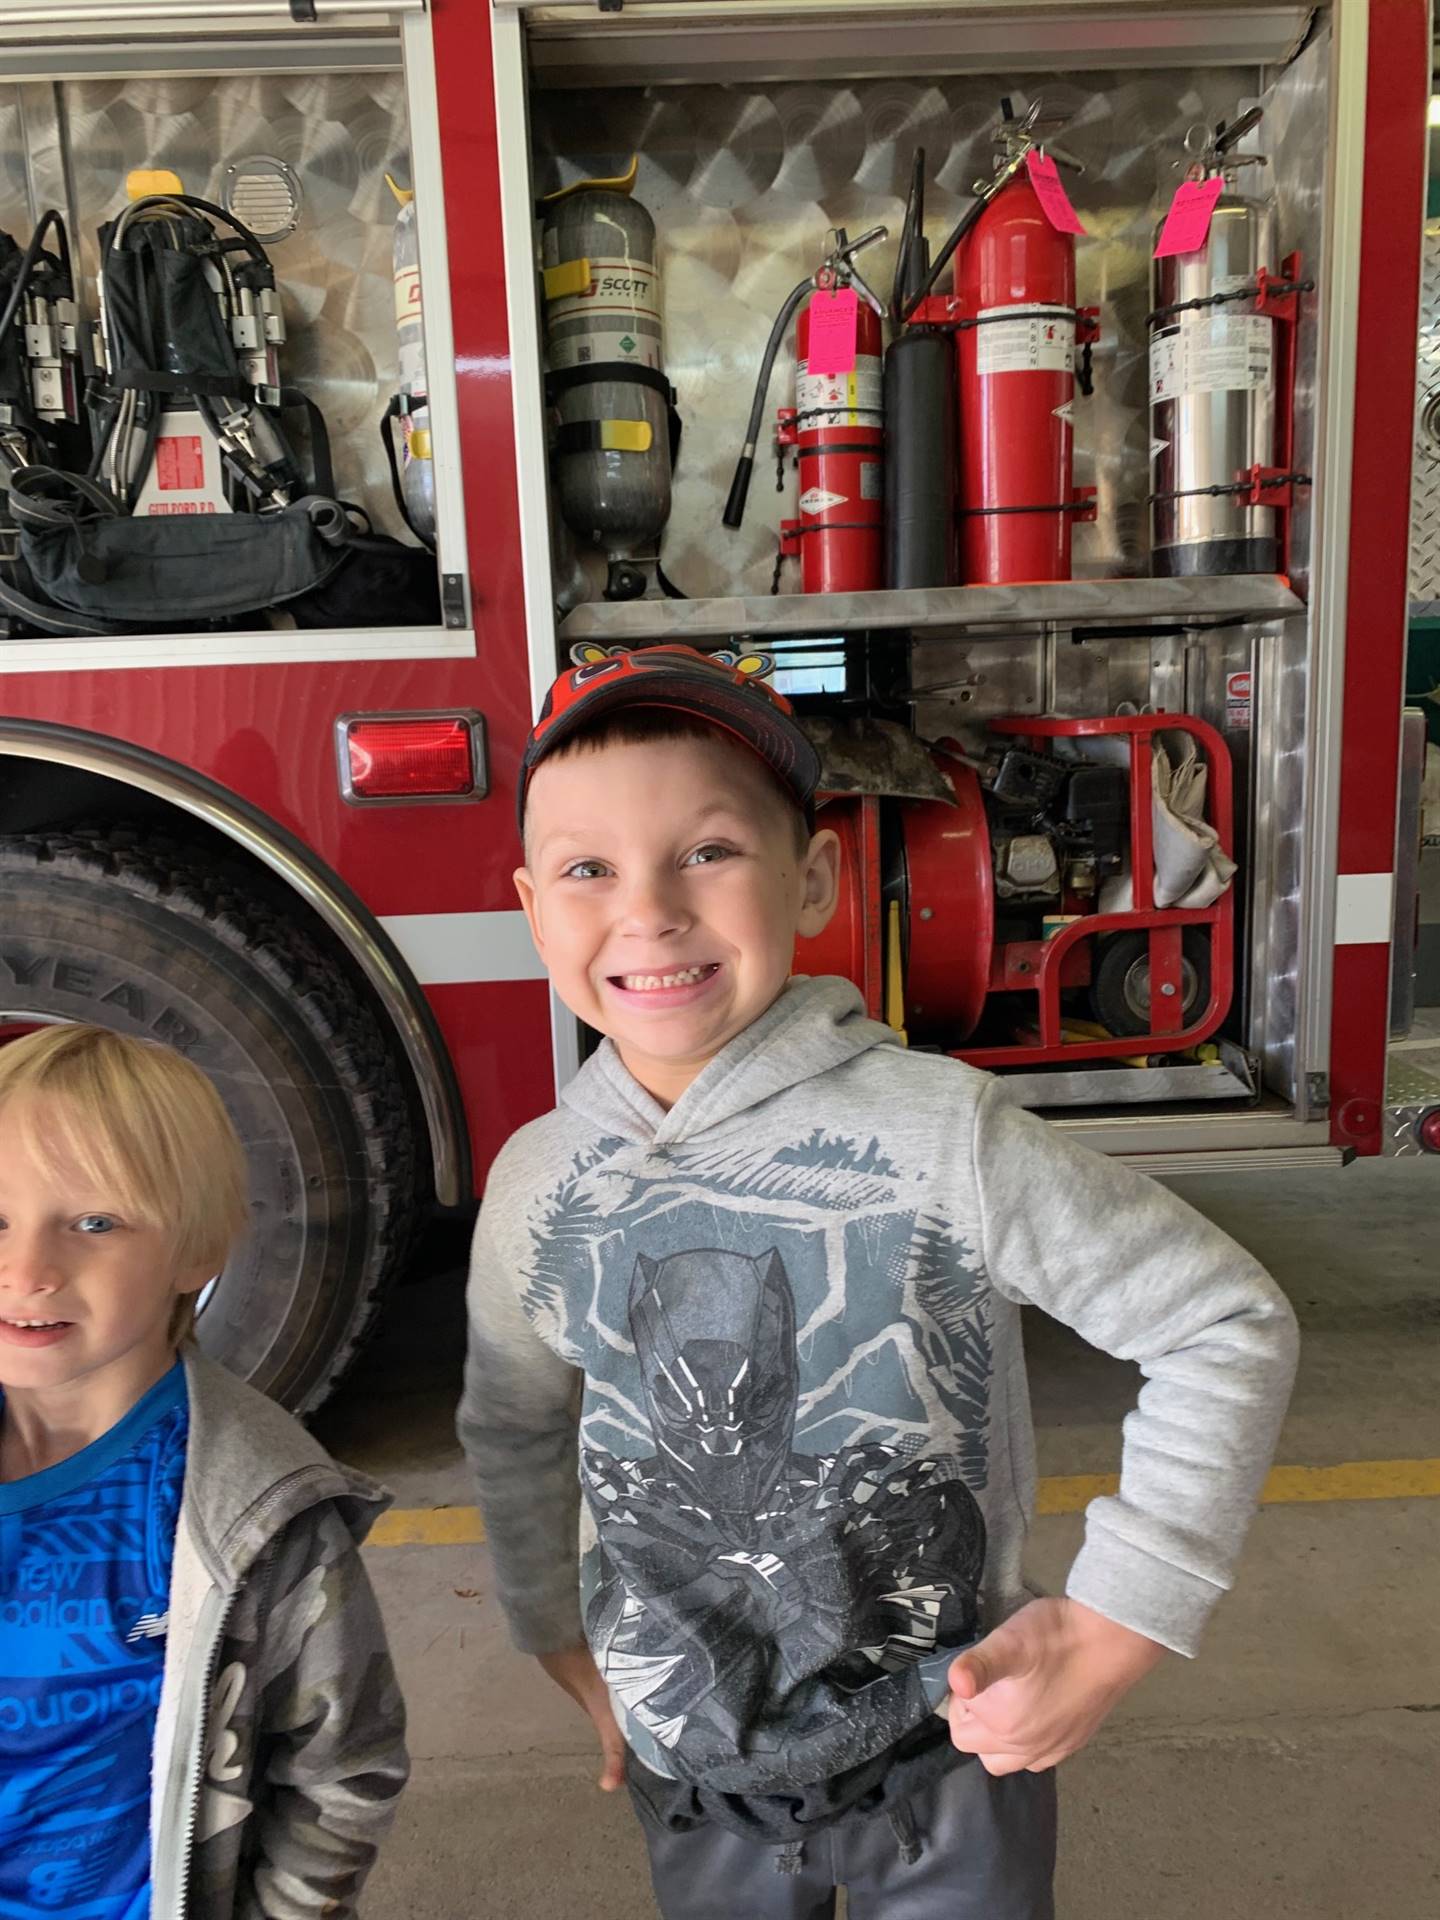 a boy with a big smile next to fire engine.